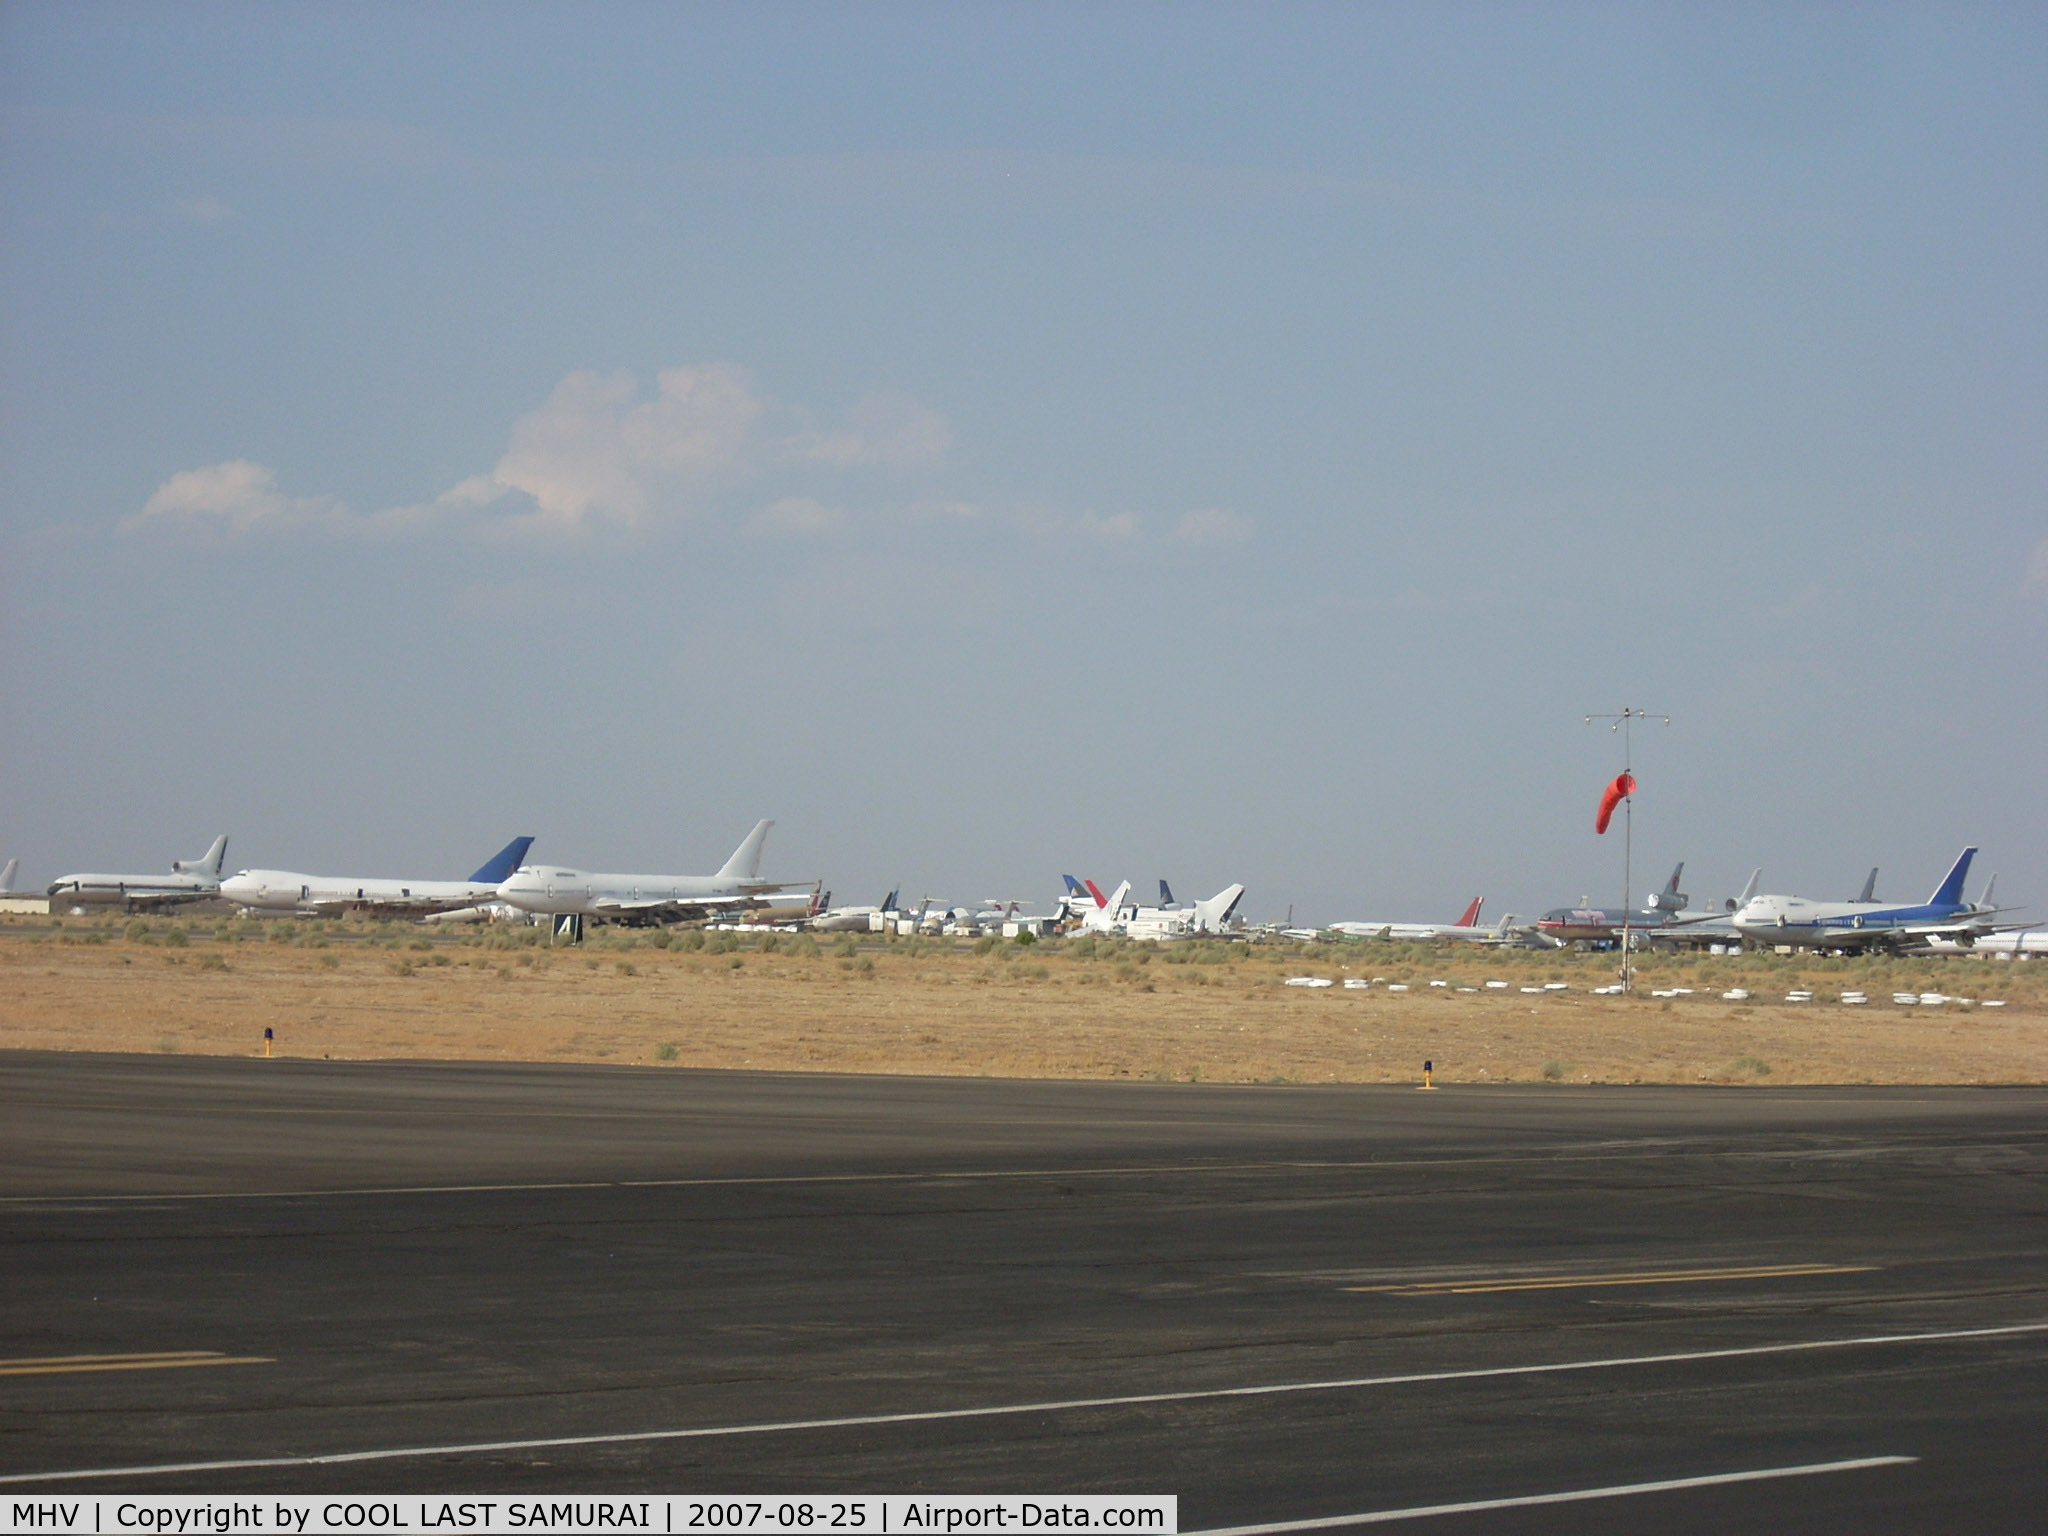 Mojave Airport (MHV) - Aircraft storage. ANA's B747SR retired in 2006 on the right side of this picture